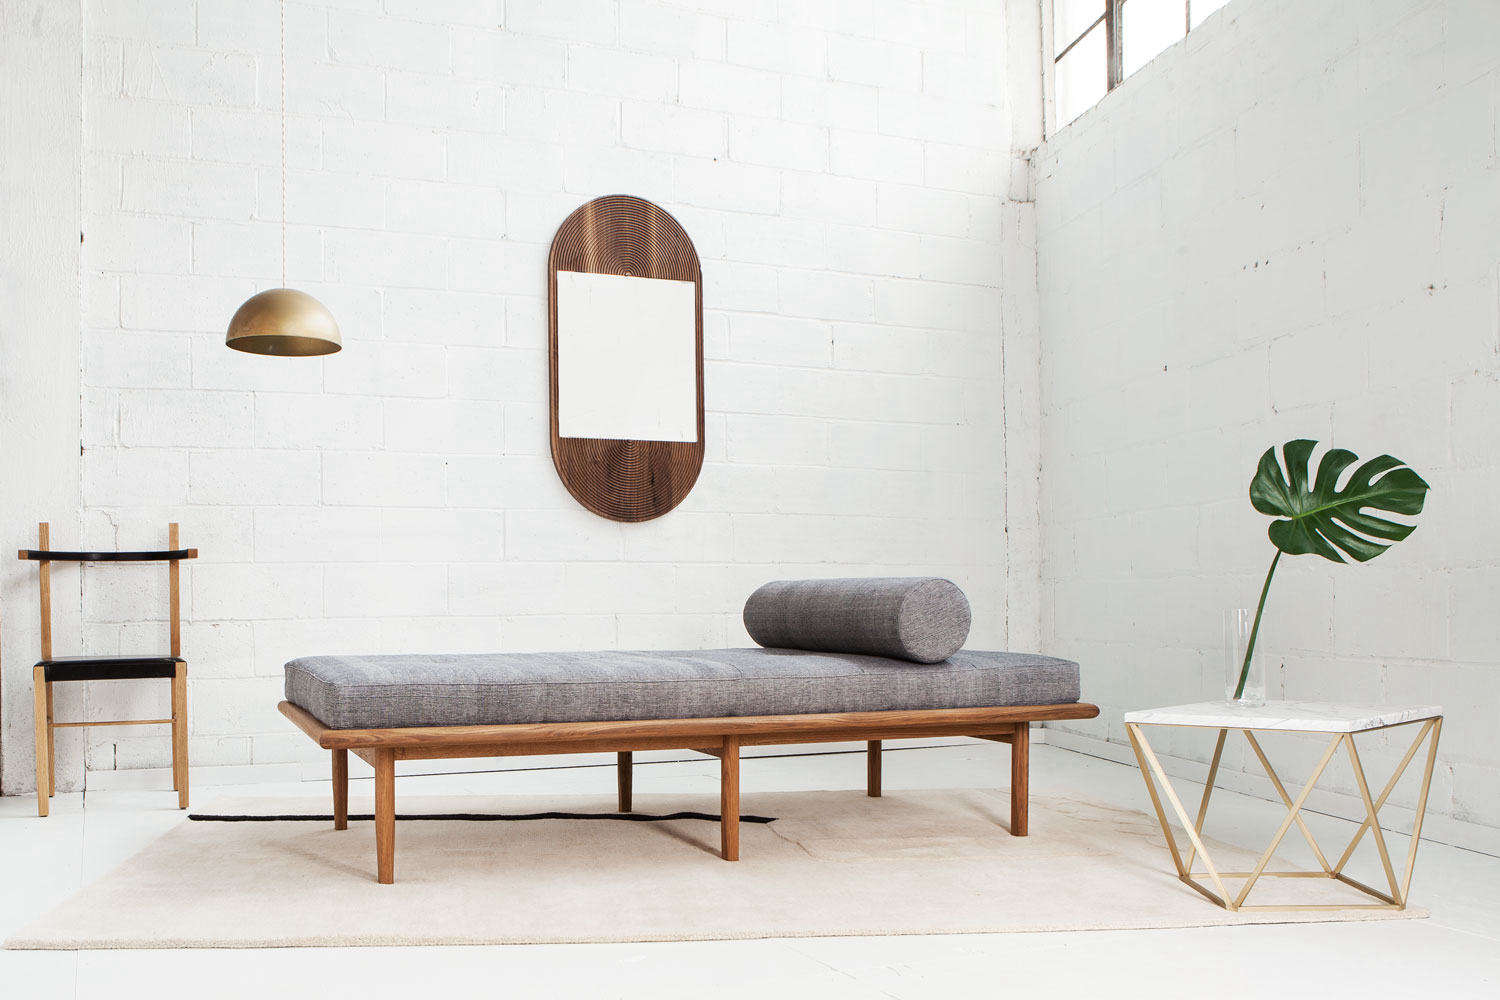 High/Low: A Trio of Scandinavian-Style Modern Daybeds - Remodelista